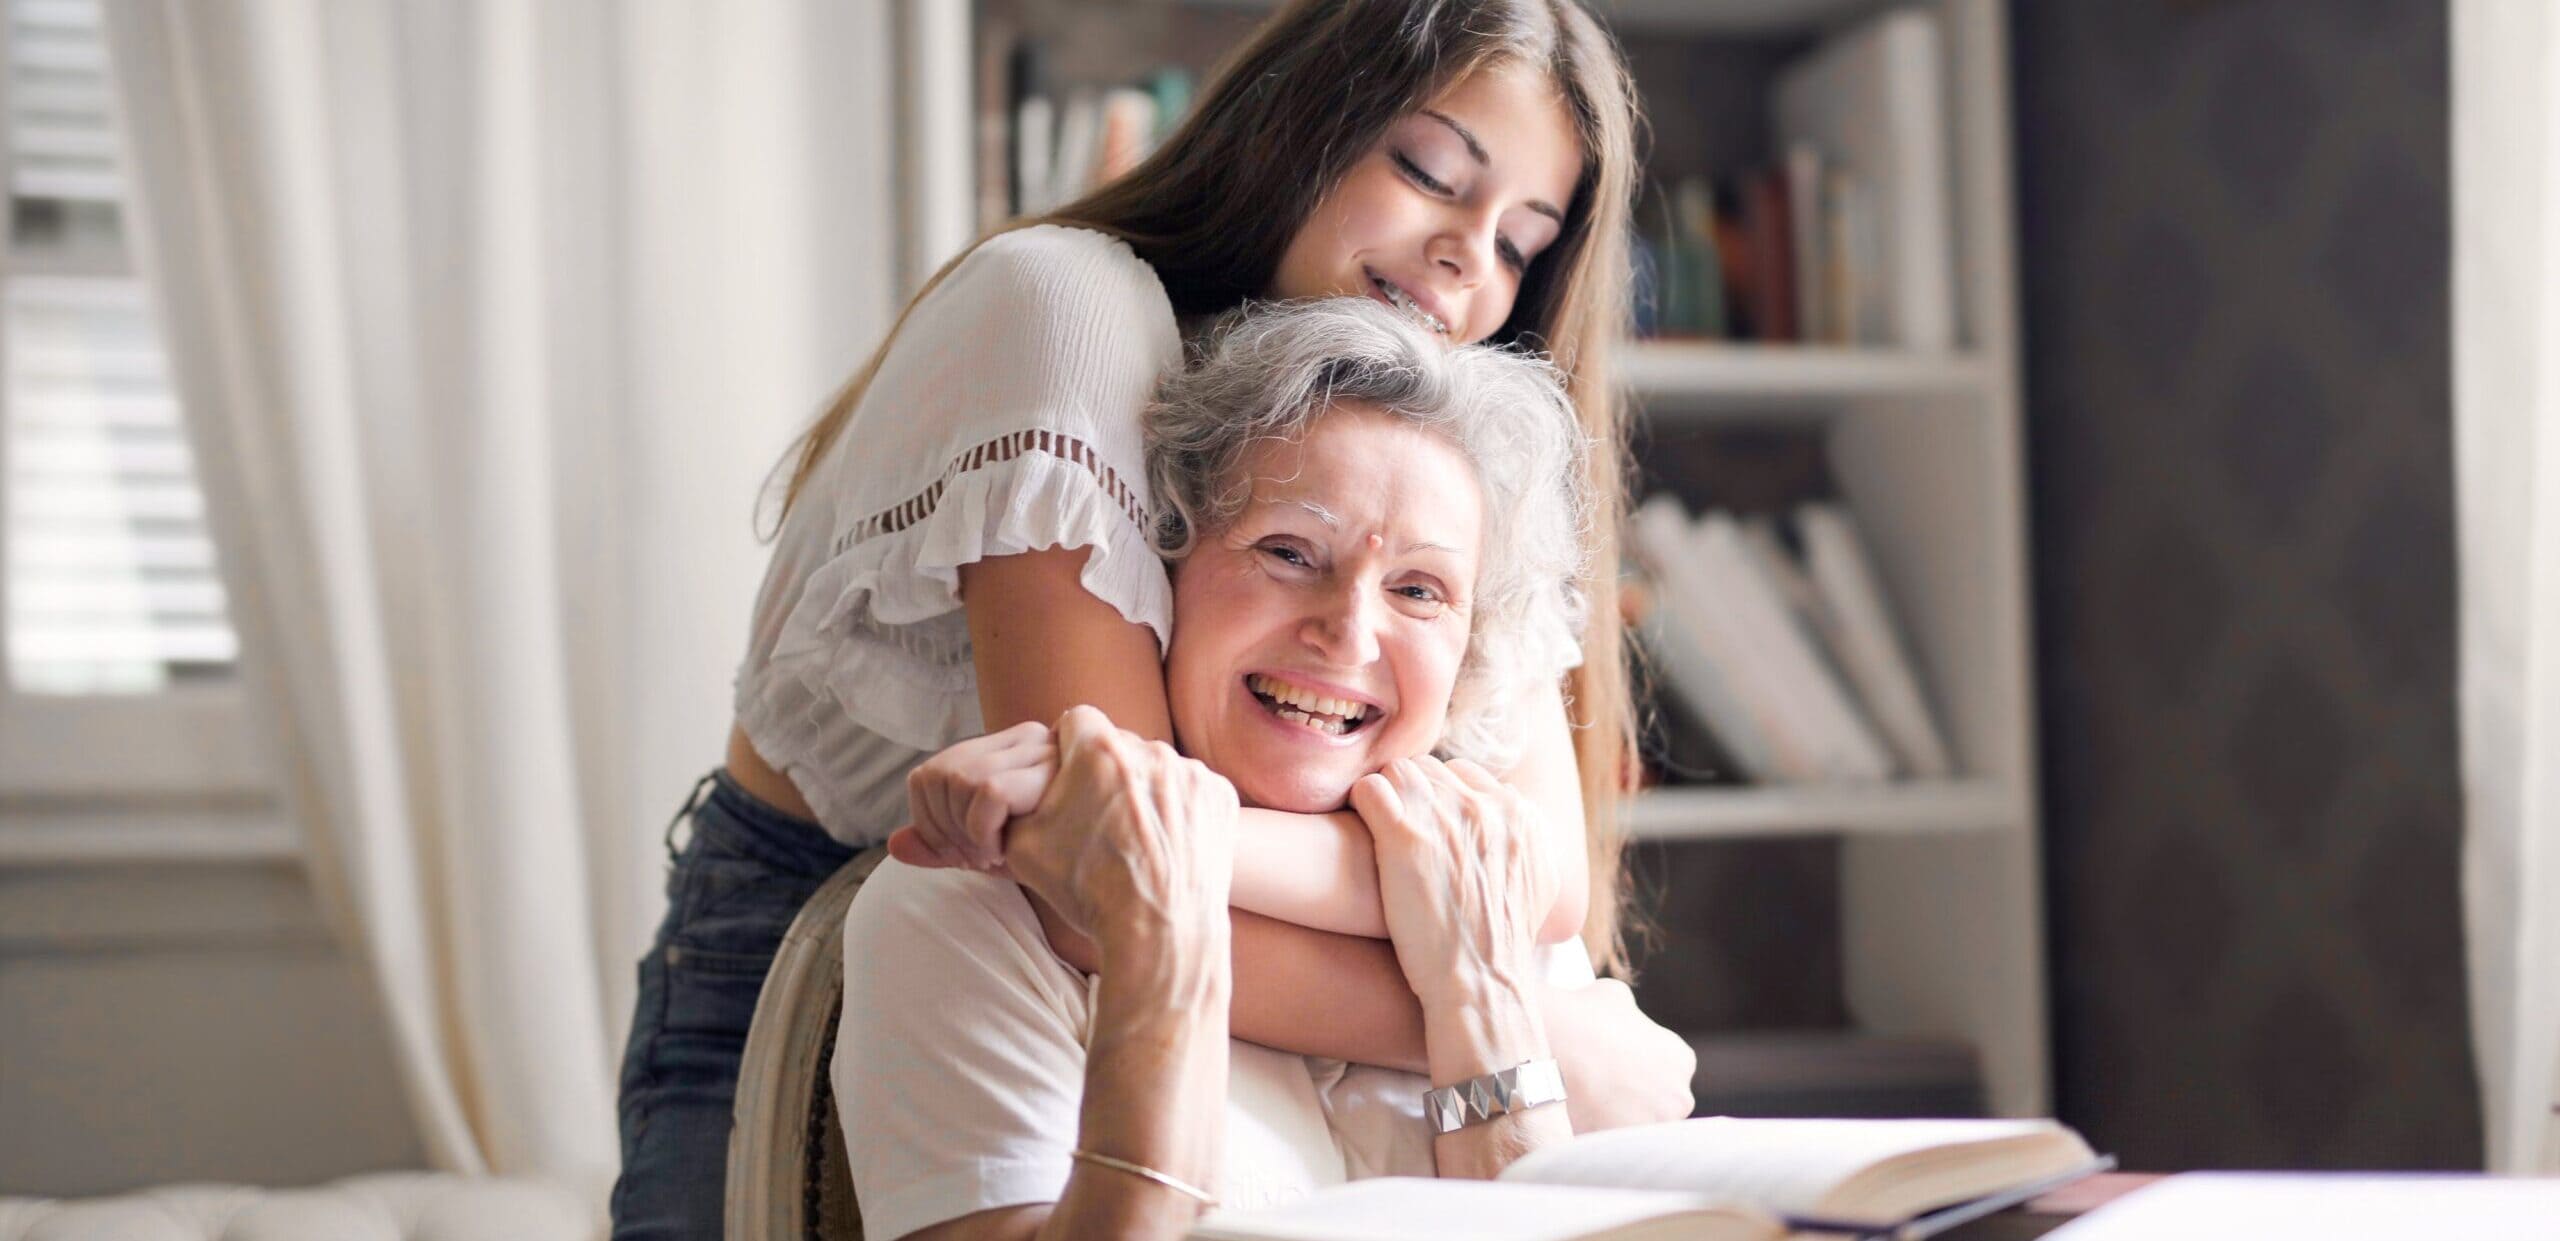 young lady with arms around elderly woman's neck embracing her